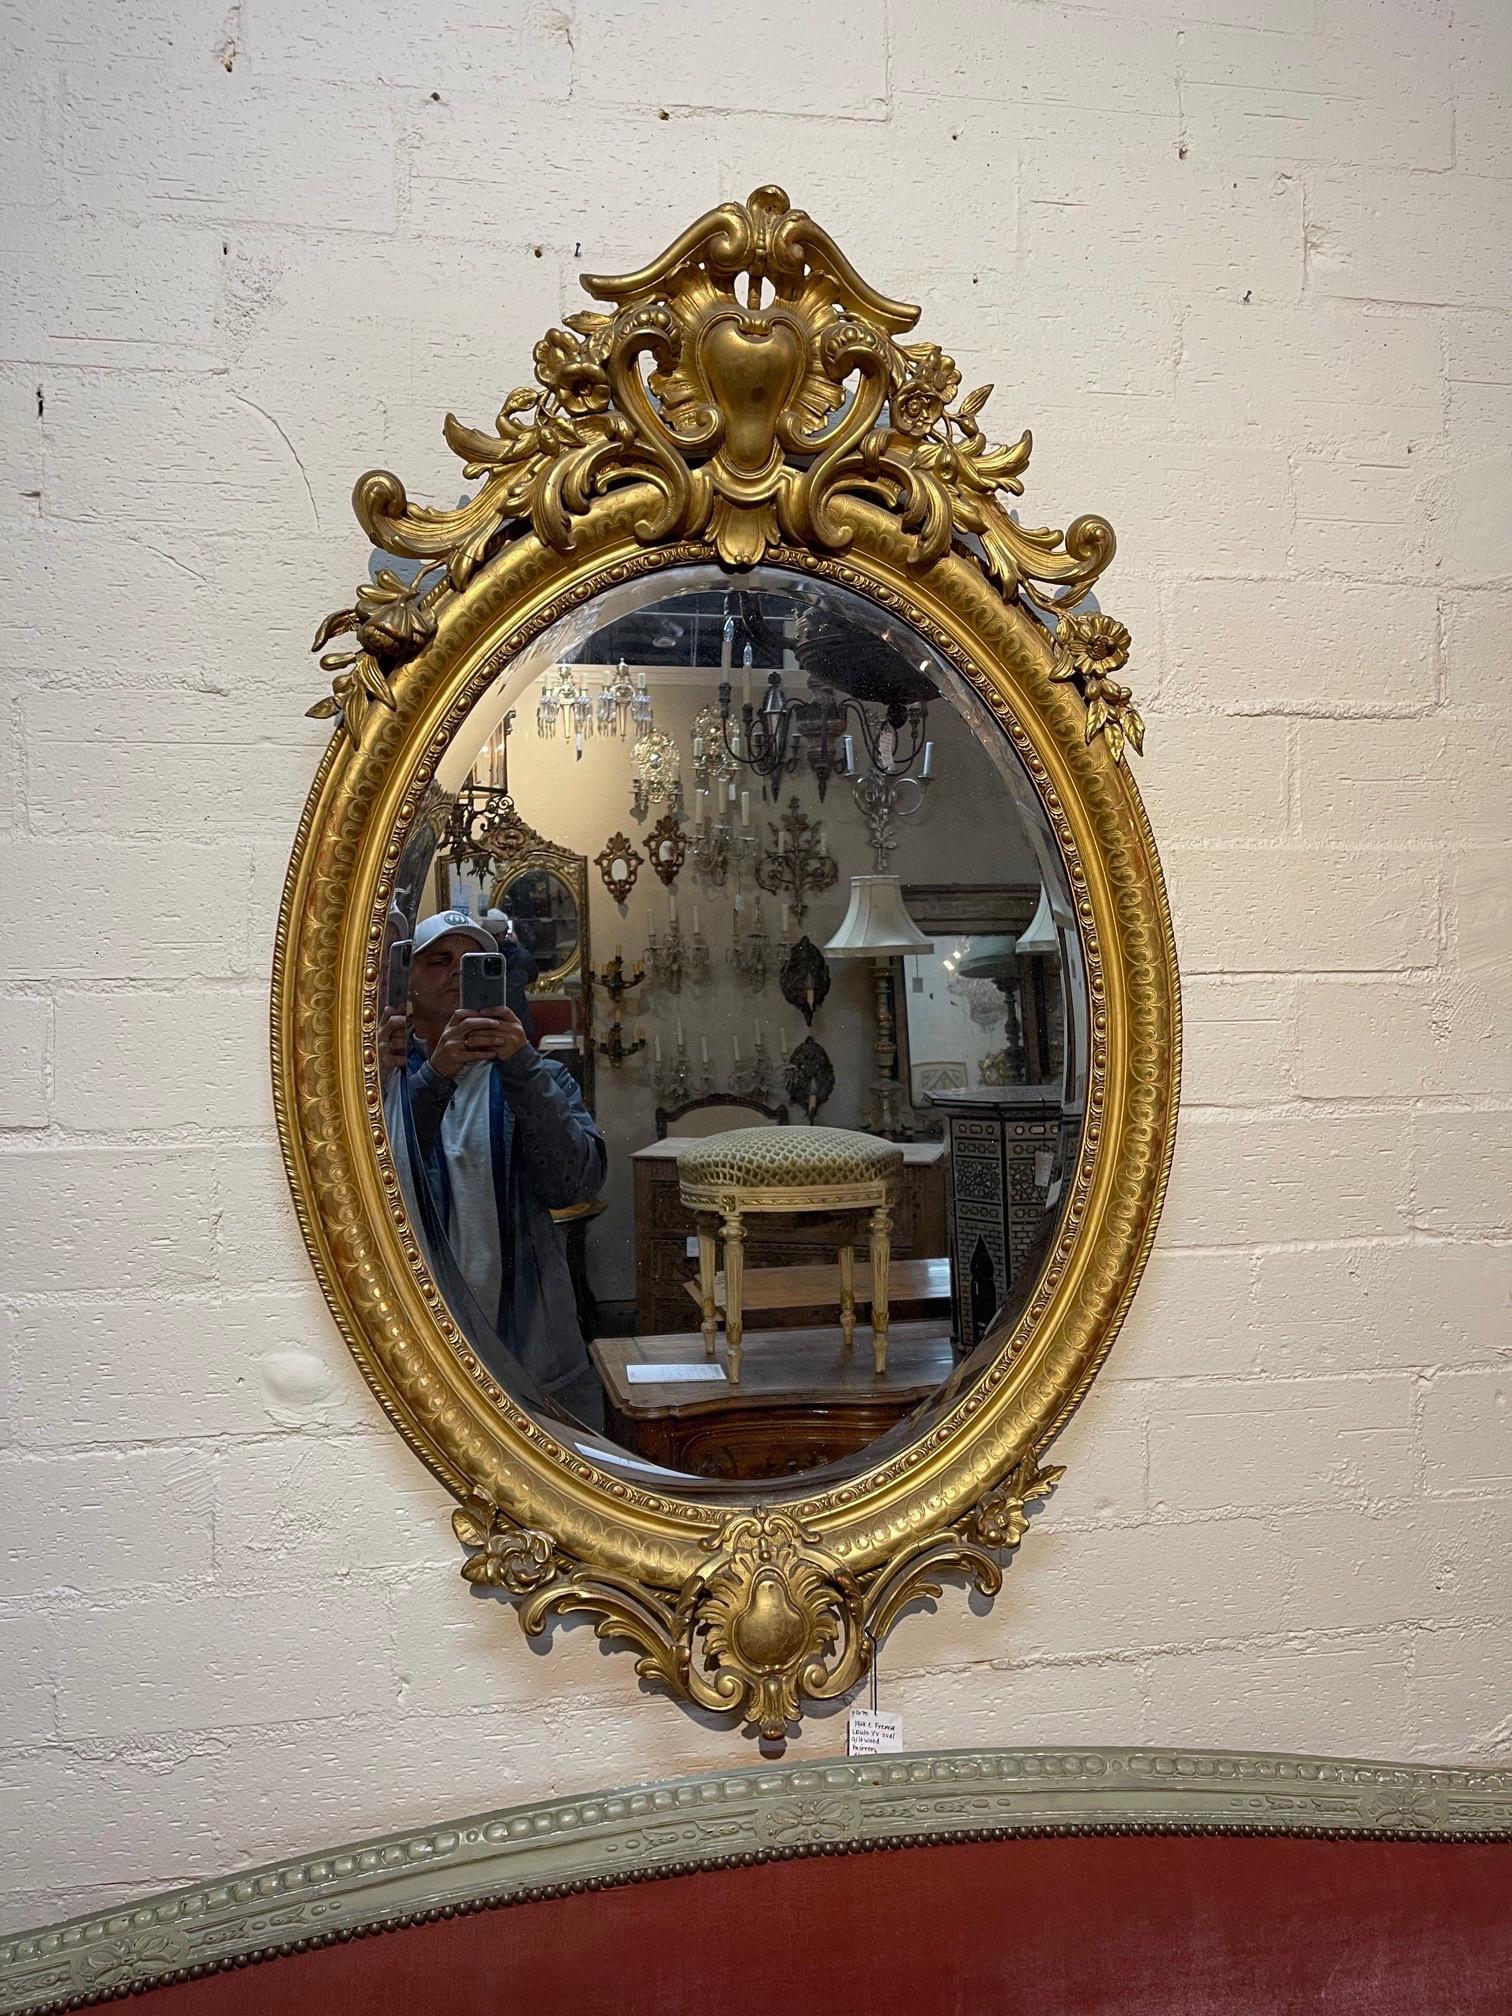 Elegant 19th century French Louis XV oval giltwood mirror. Beautiful carvings with florals images and crests. Lovely!